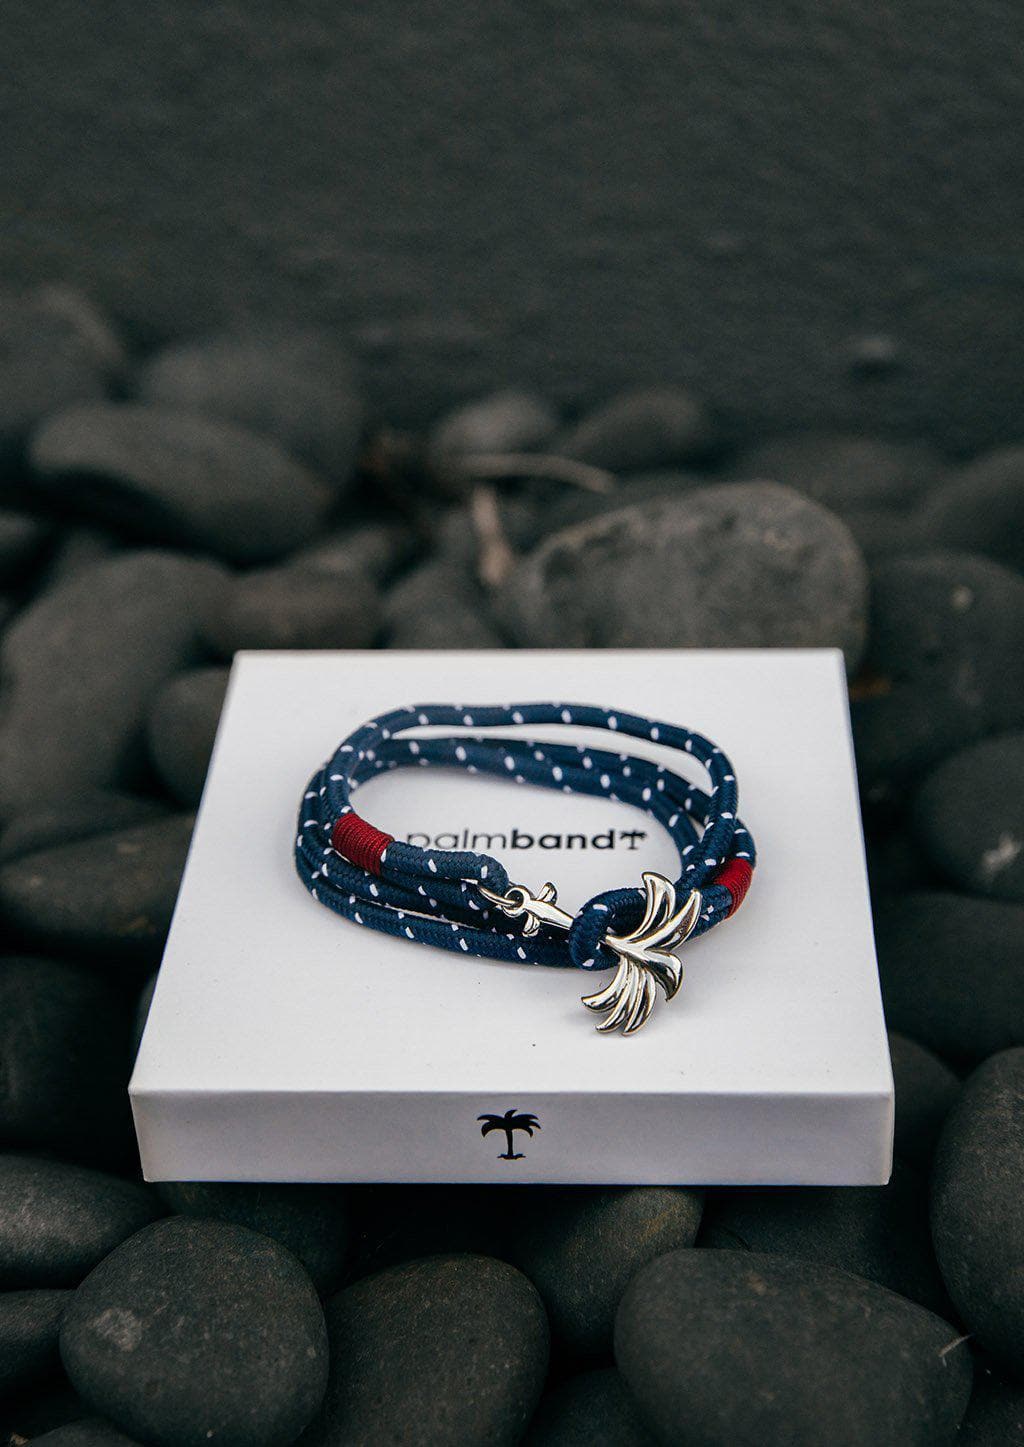 Voyager - Triple - Season two Palm anchor bracelet with blue and red nylon band. Lying on box.